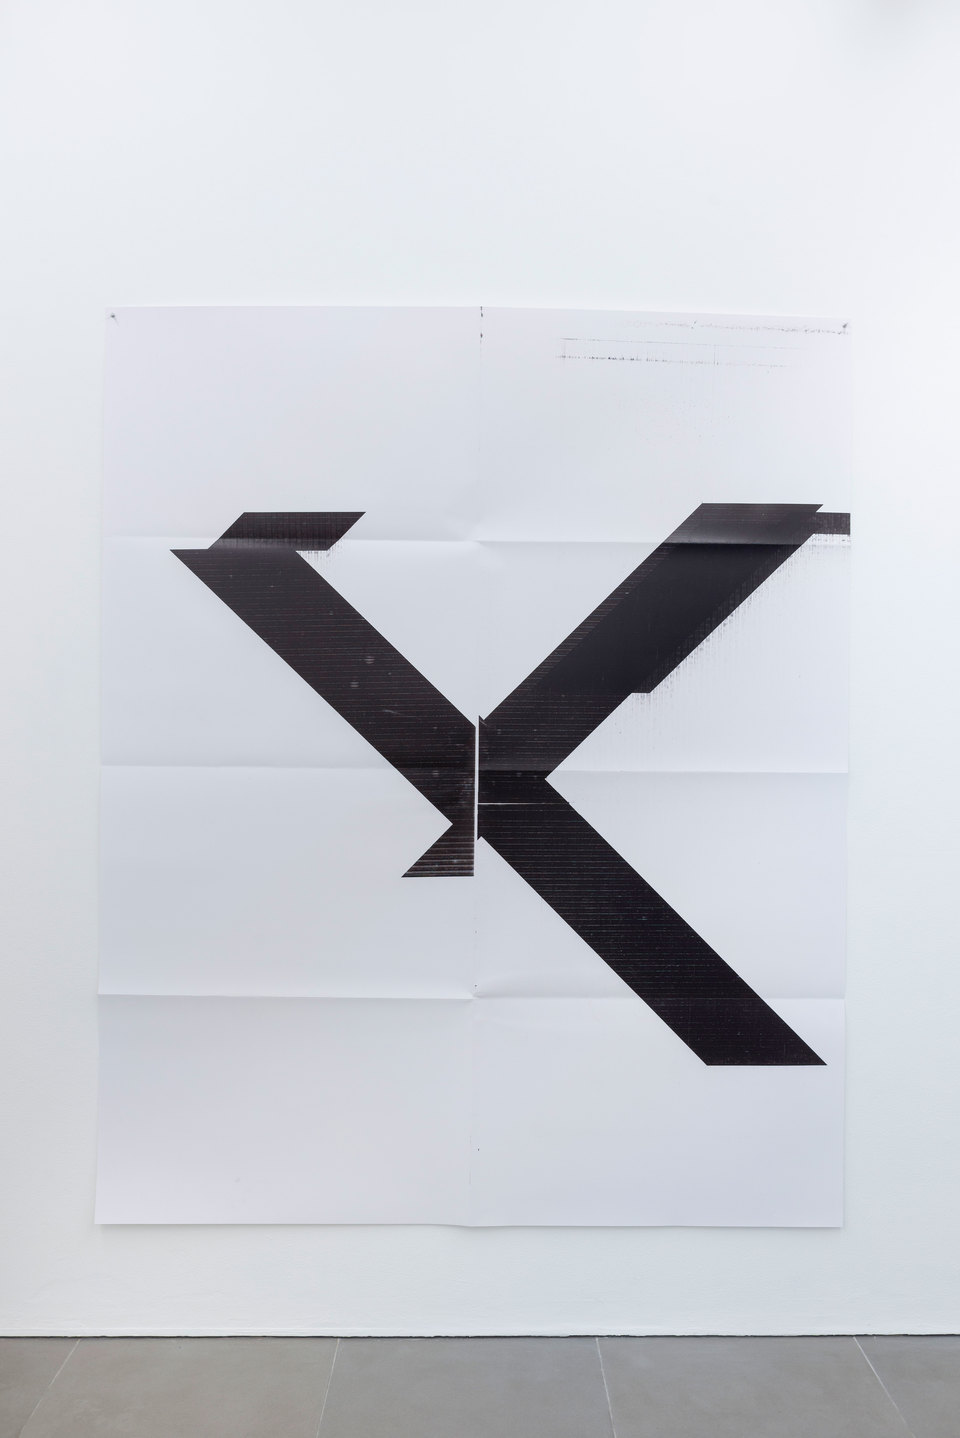 Wade Guyton Angled, 2013, Silk screen Print, 61 cm x 92 cm x 1.3 cm, Cell Project Space